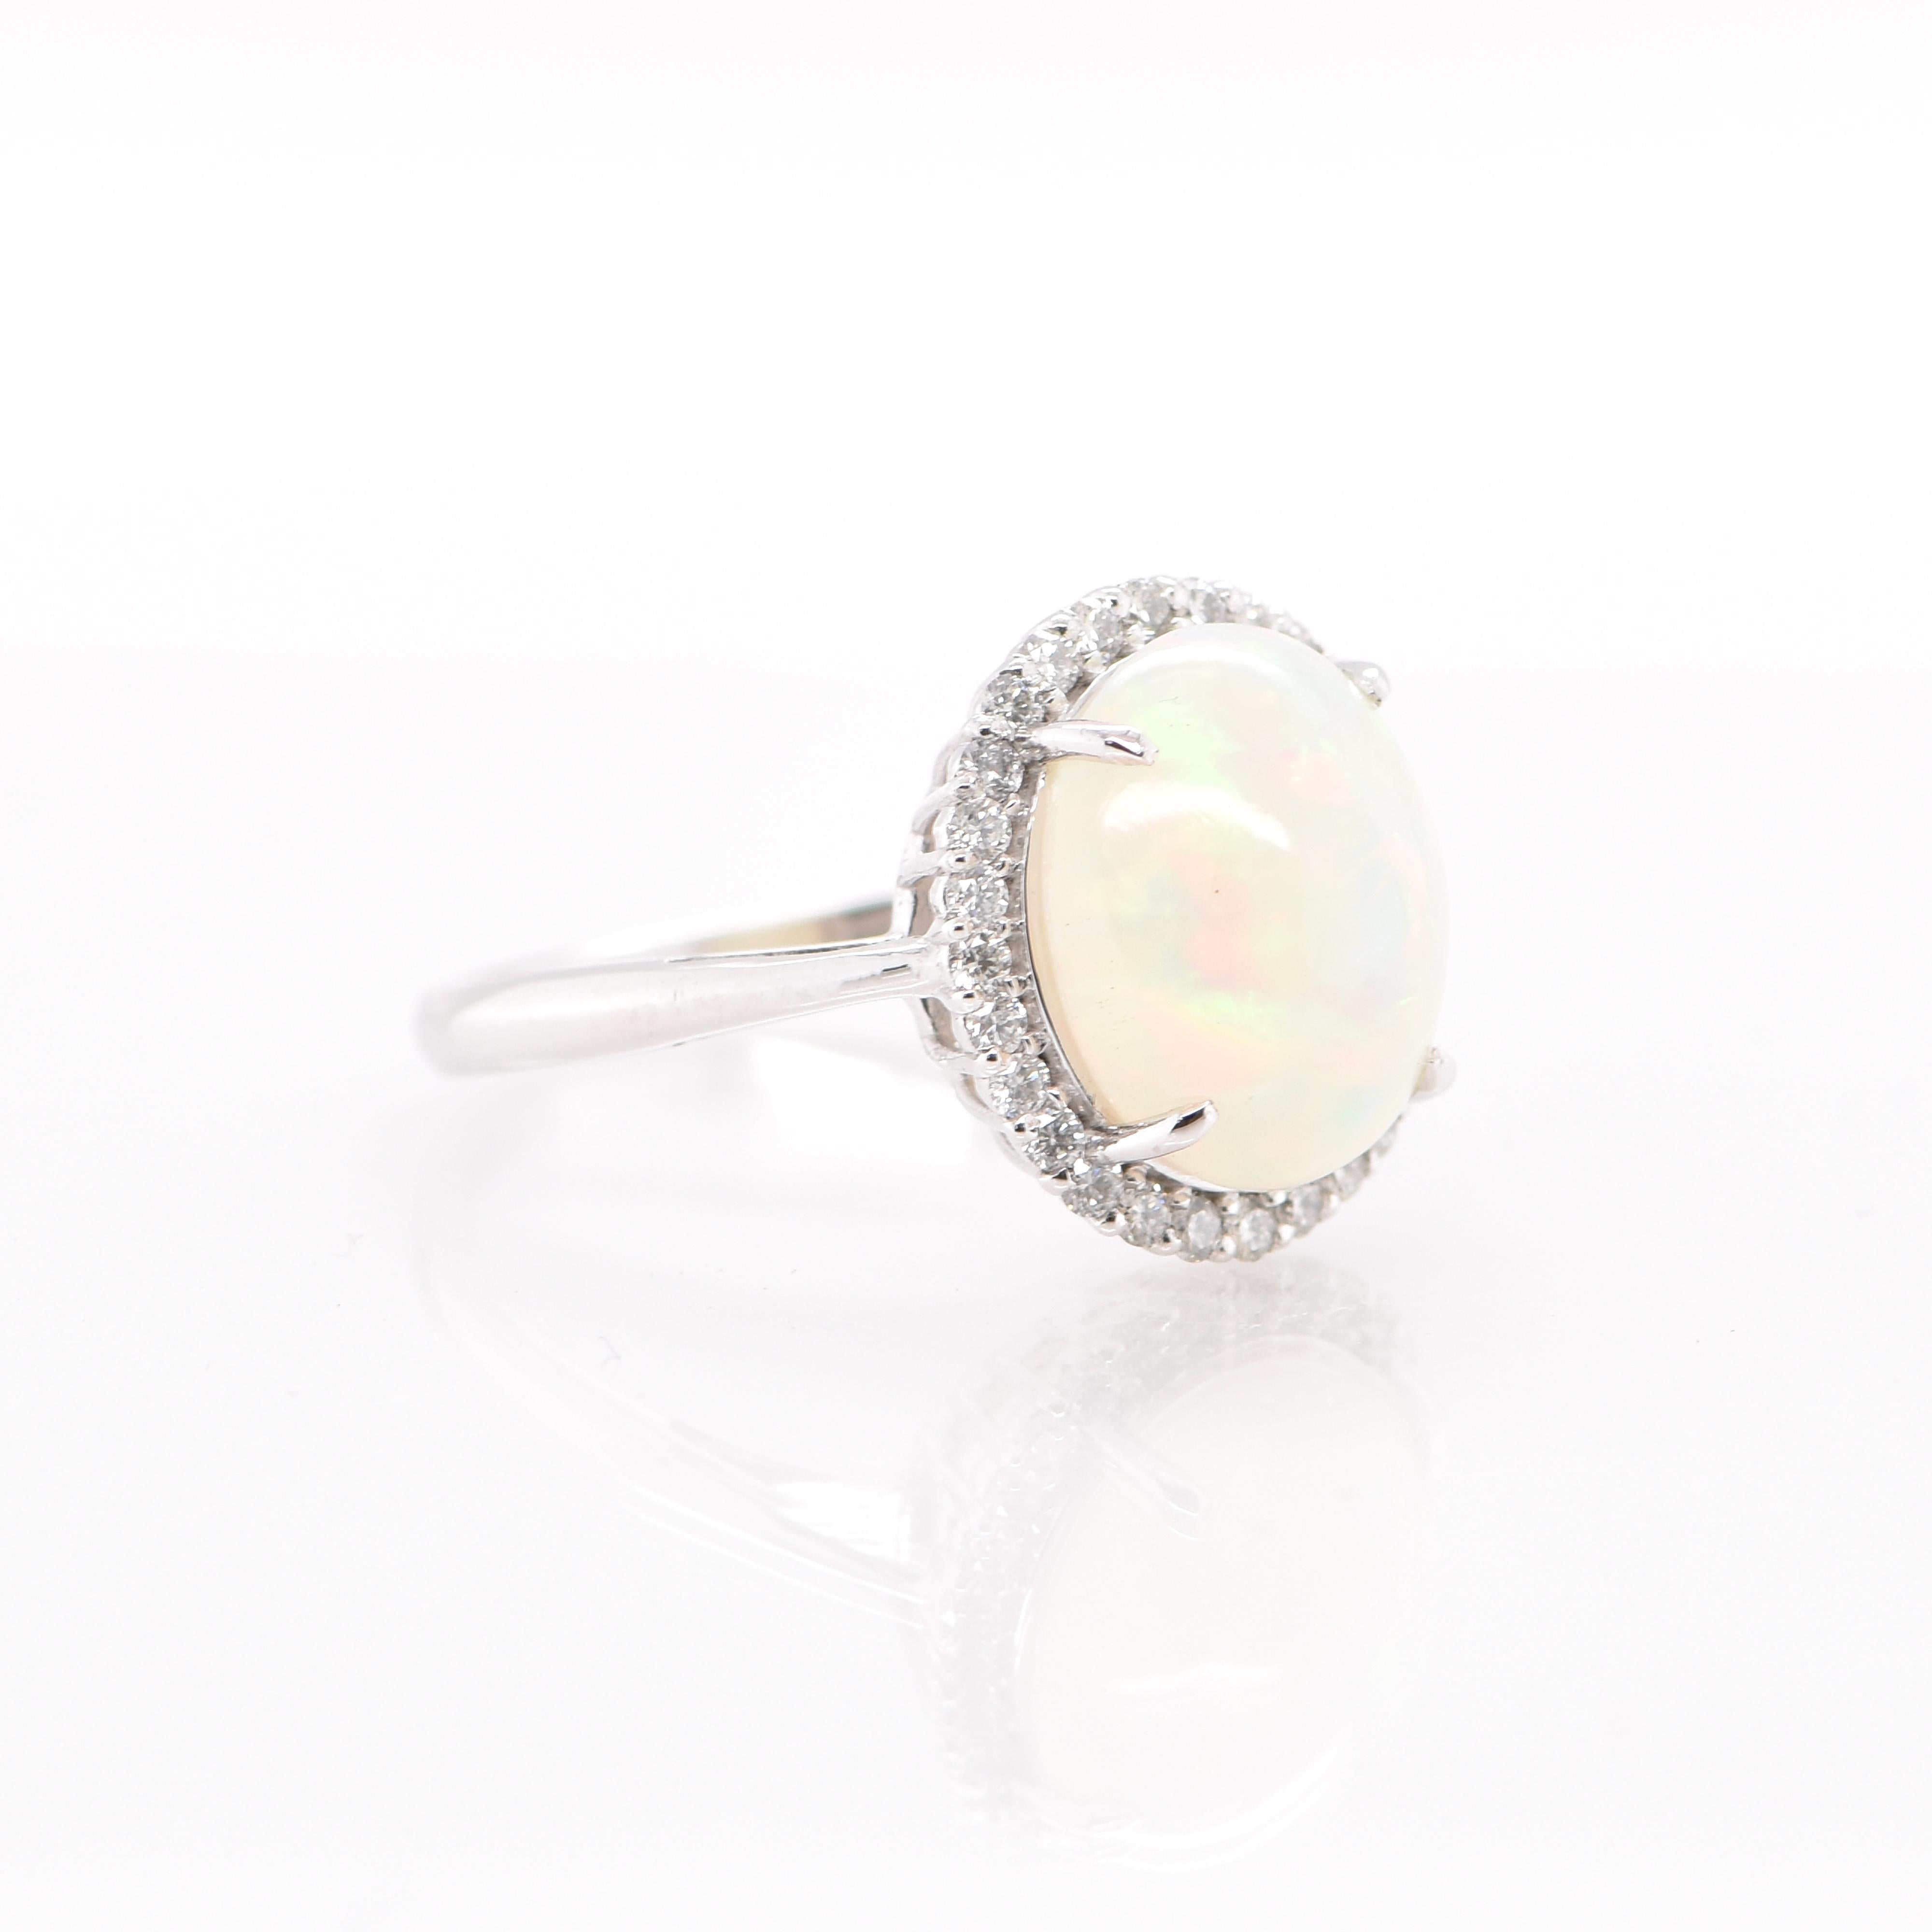 Cabochon 2.75 Carat Natural Ethiopian White Opal and Diamond Halo Ring Set in Platinum